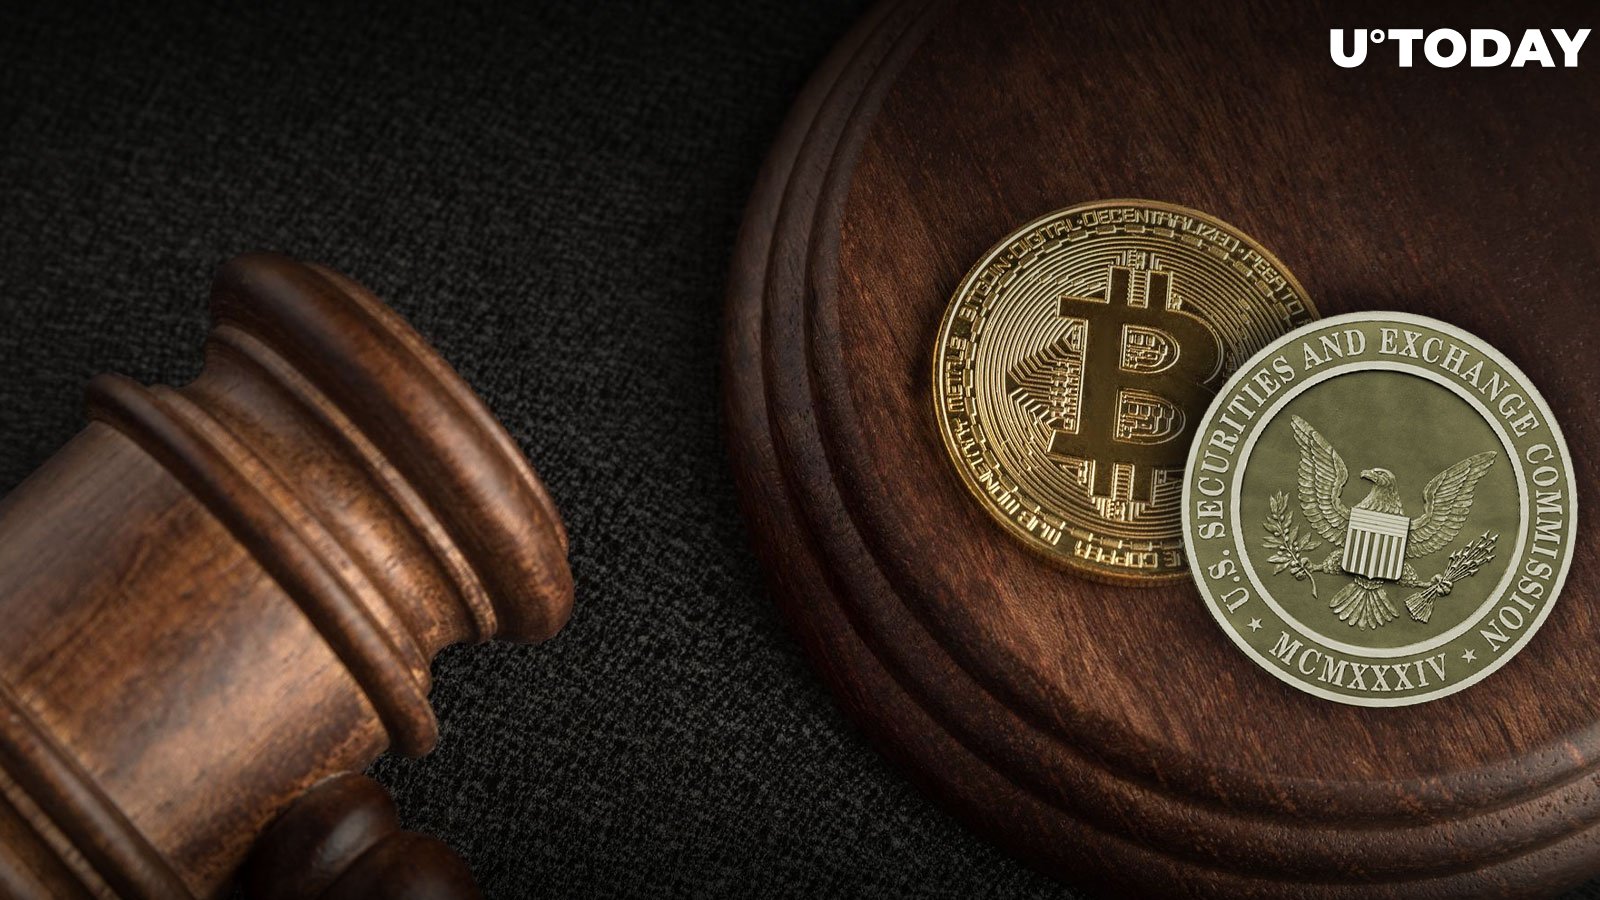 SEC engages in joint conference call with Bitcoin ETF applicants amid  approval speculations